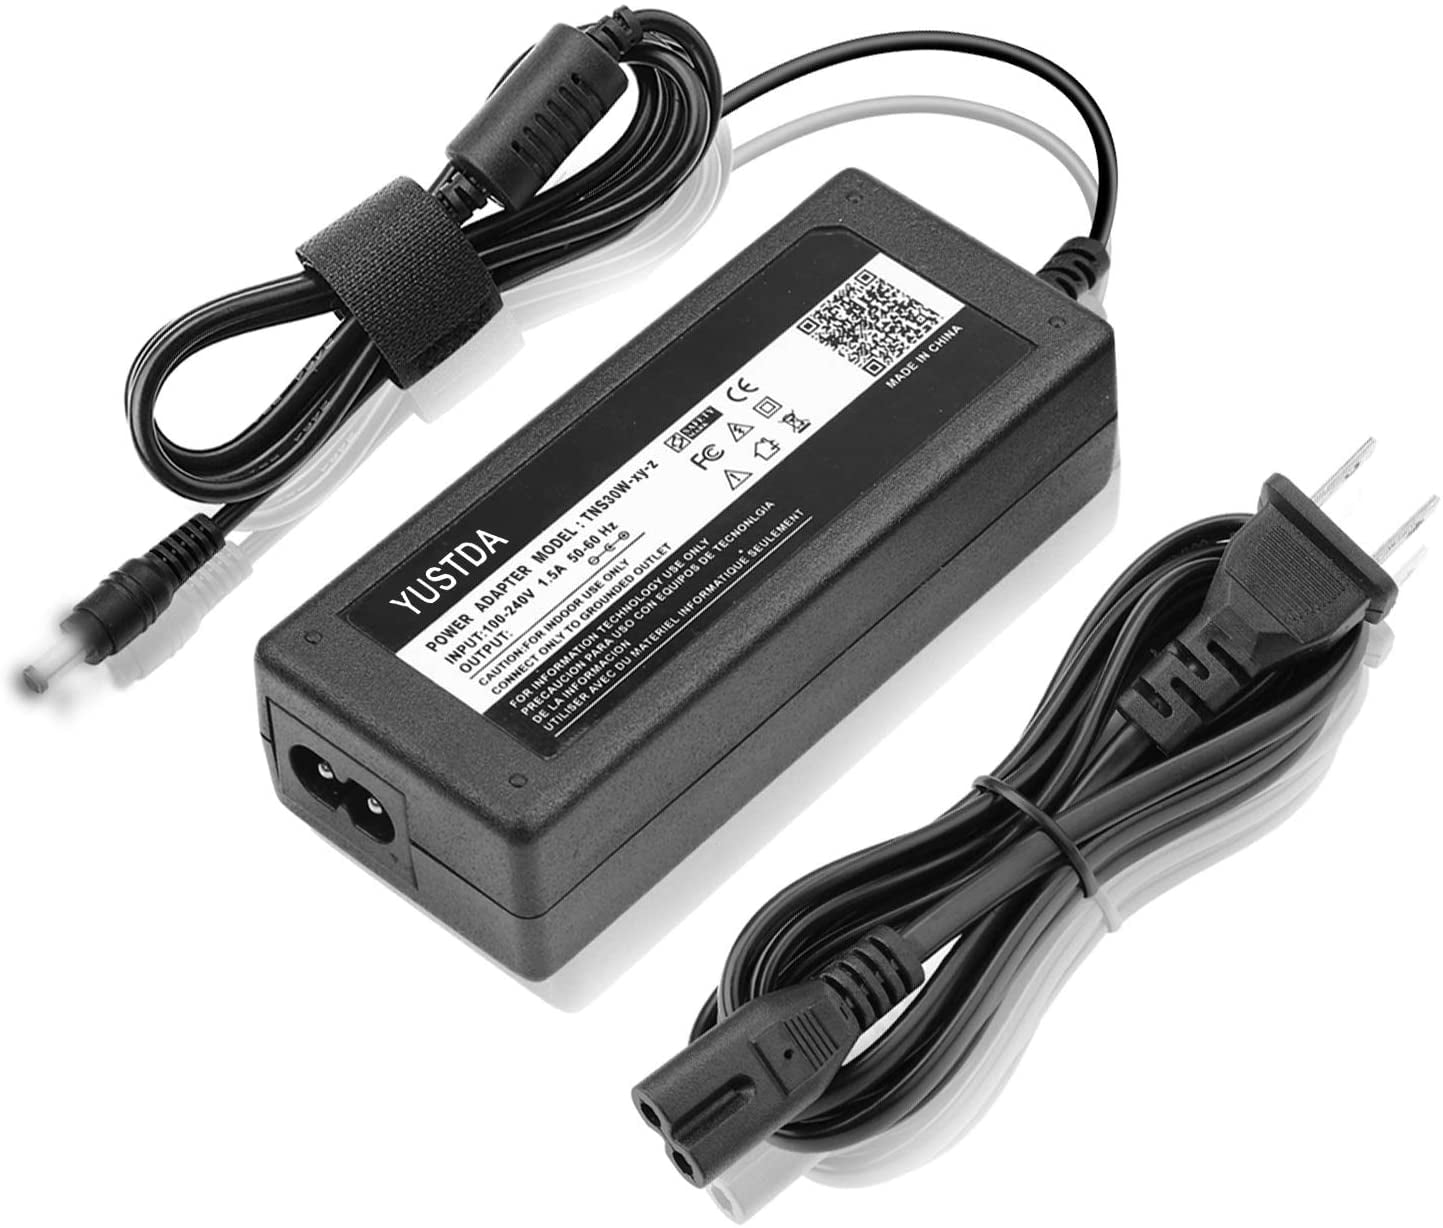 Channel Well AC Adapter for G3 External Battery Charger BA-303 DC Power Supply 